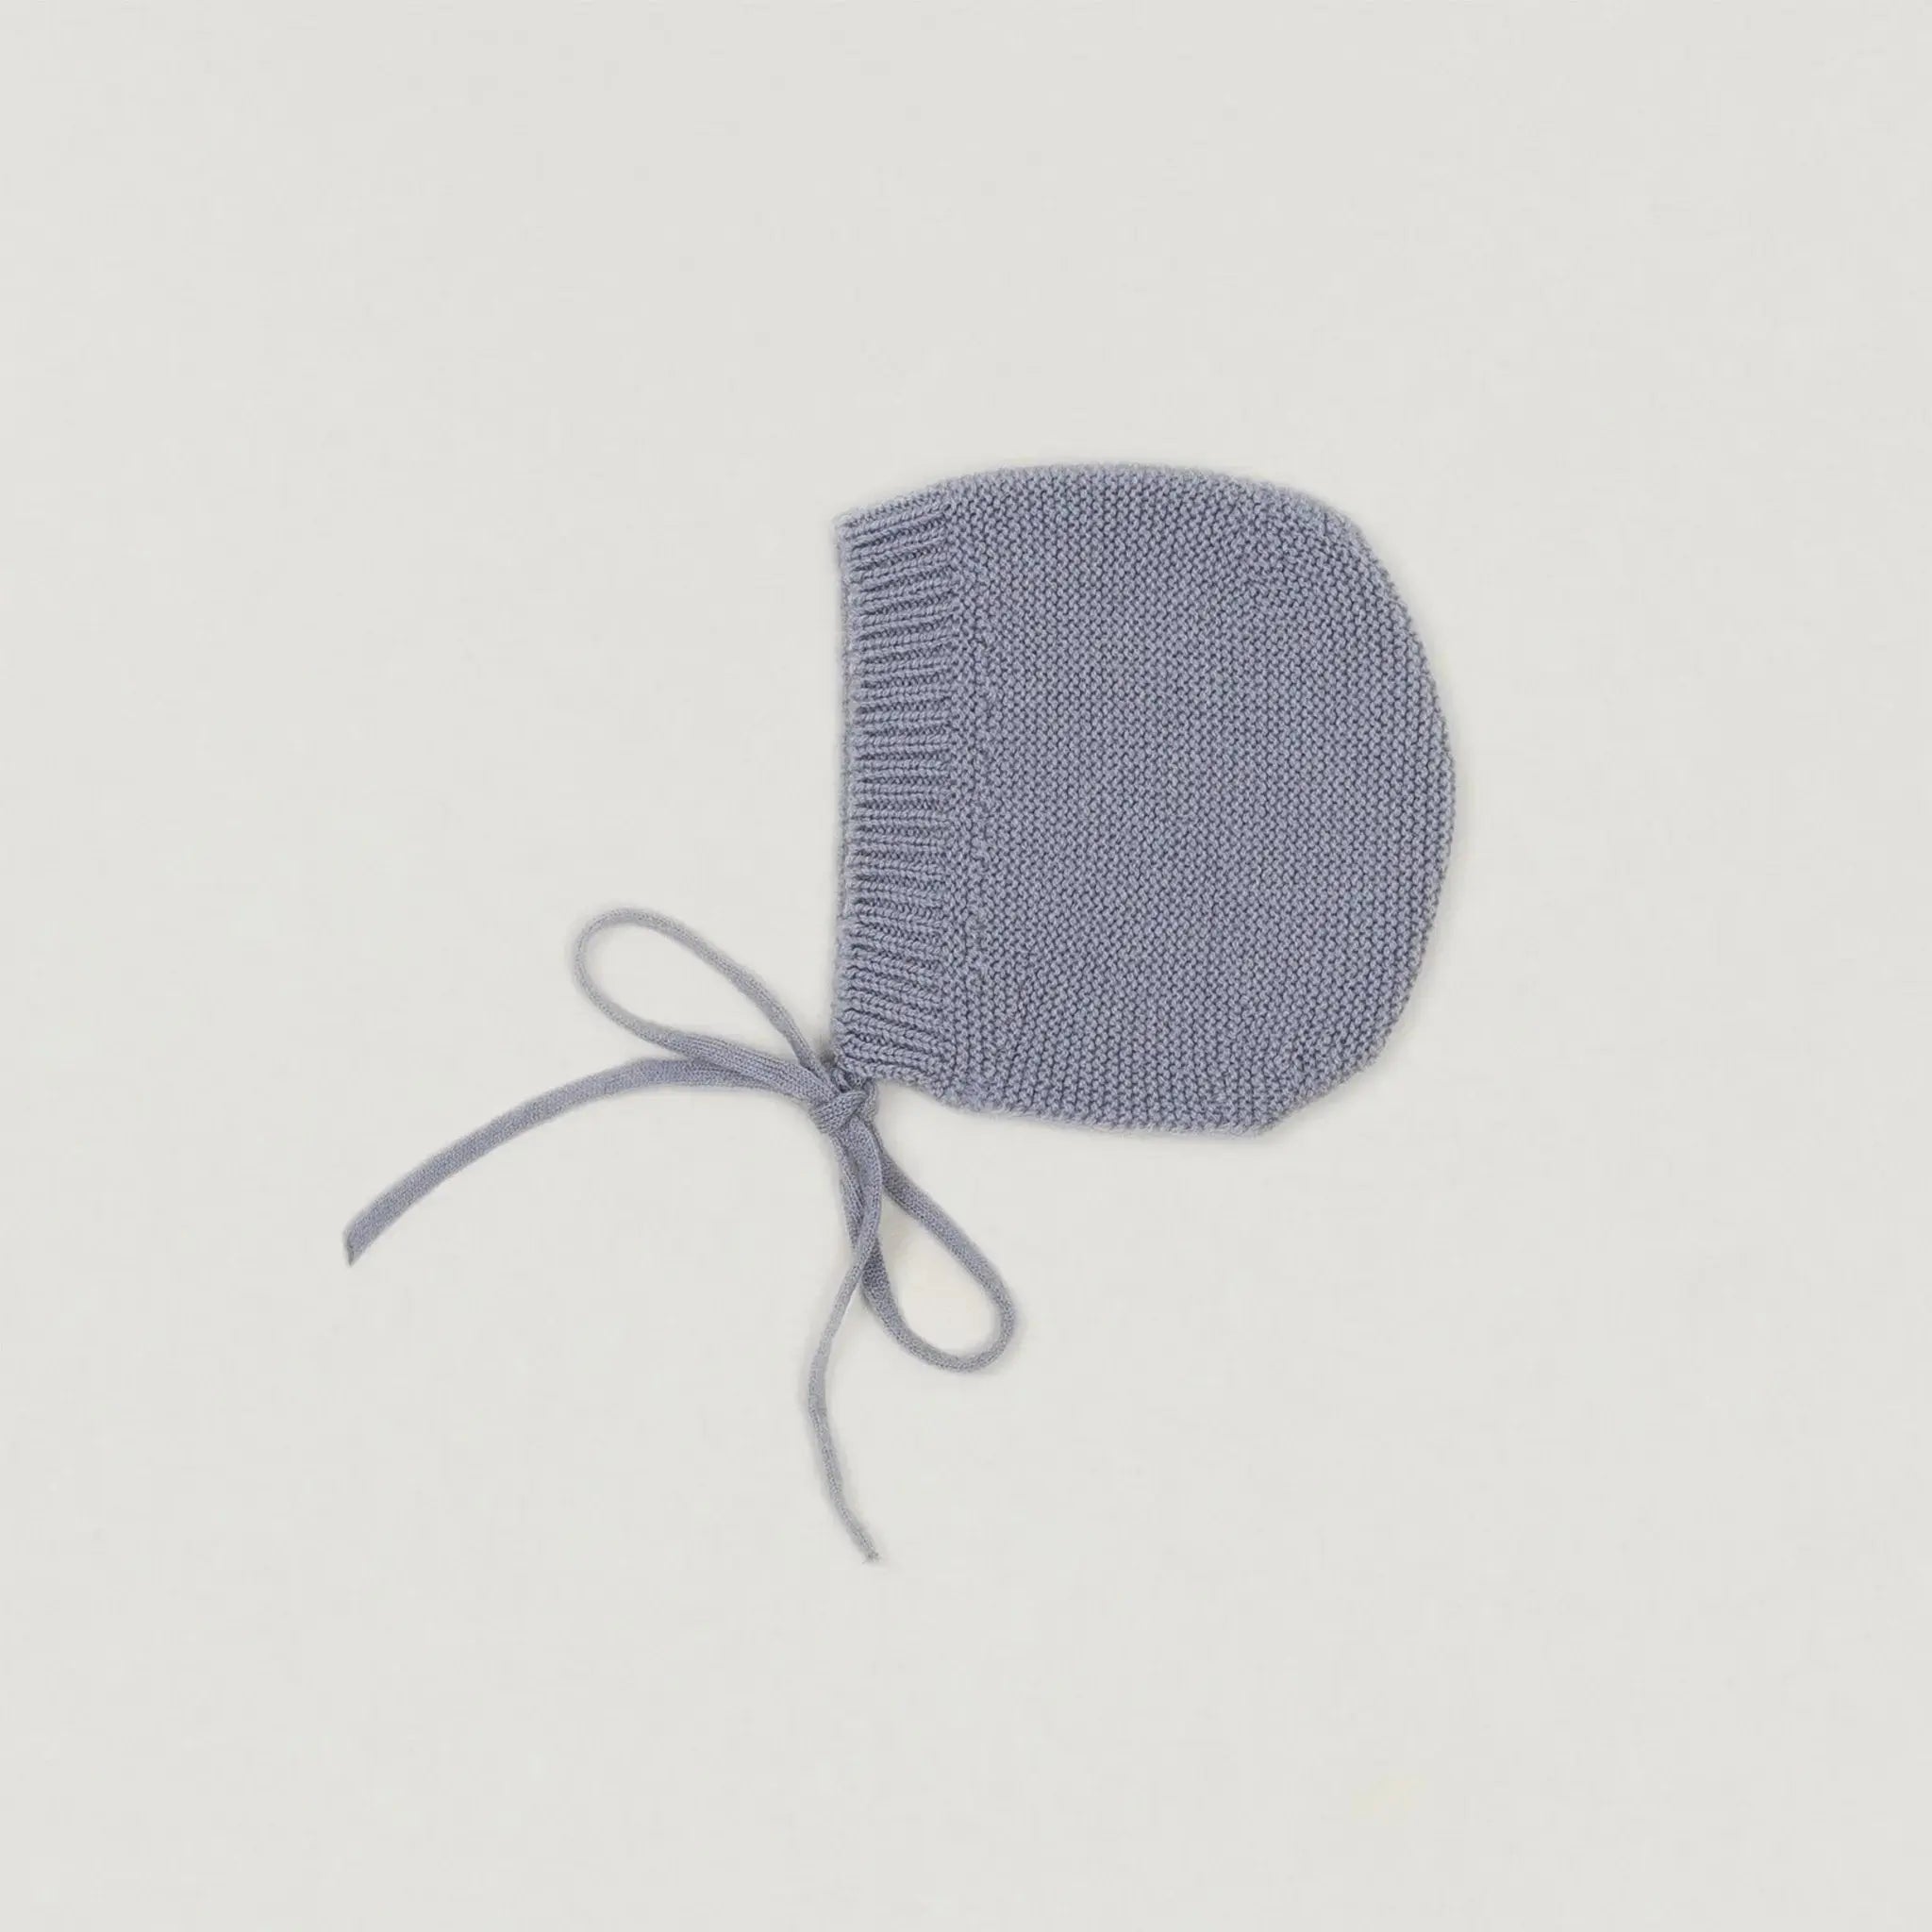 Cap made of yak & cashmere, discontinued color